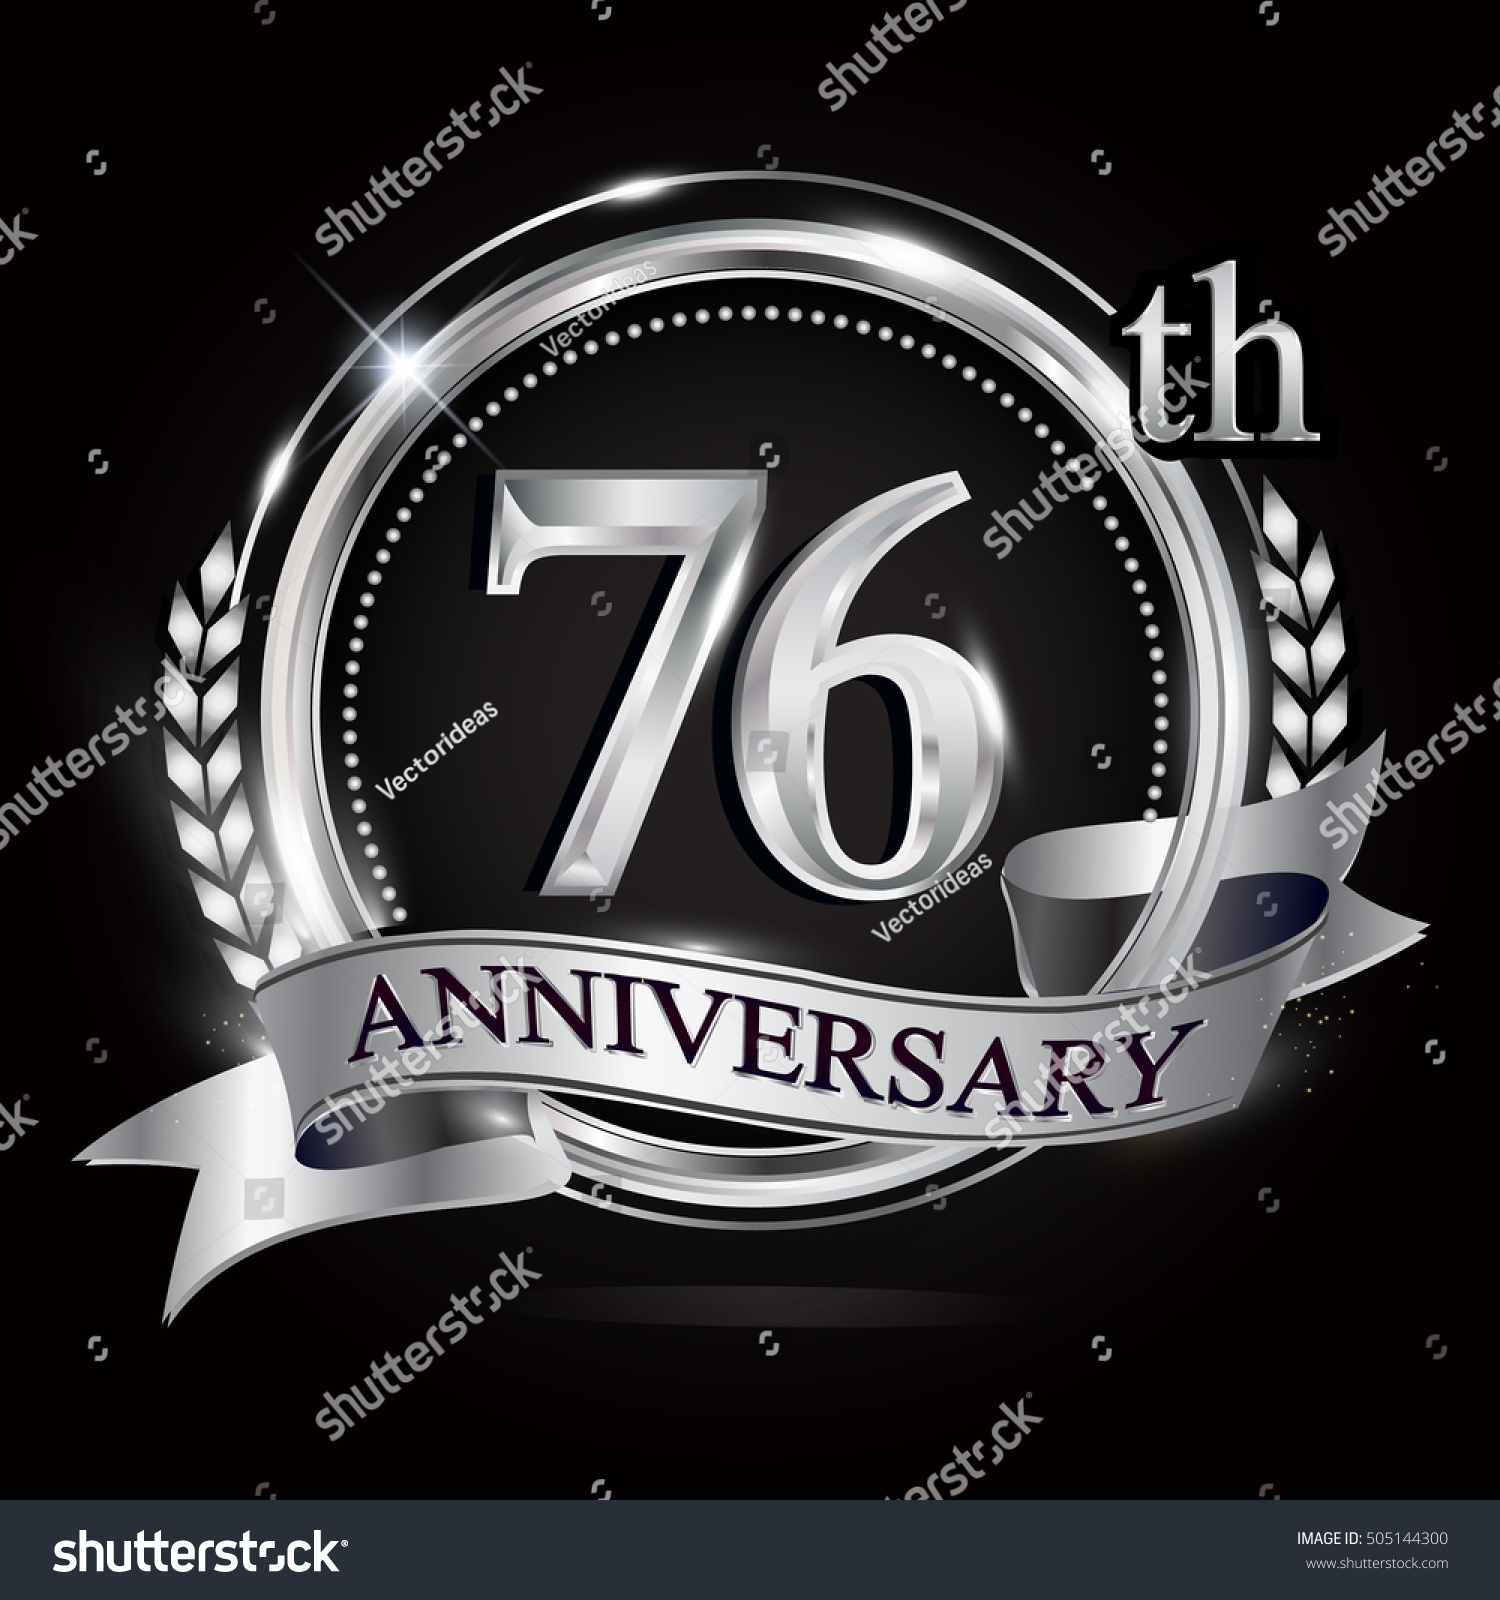 Celebrating 76th anniversary logo, with silver - Royalty Free Stock ...